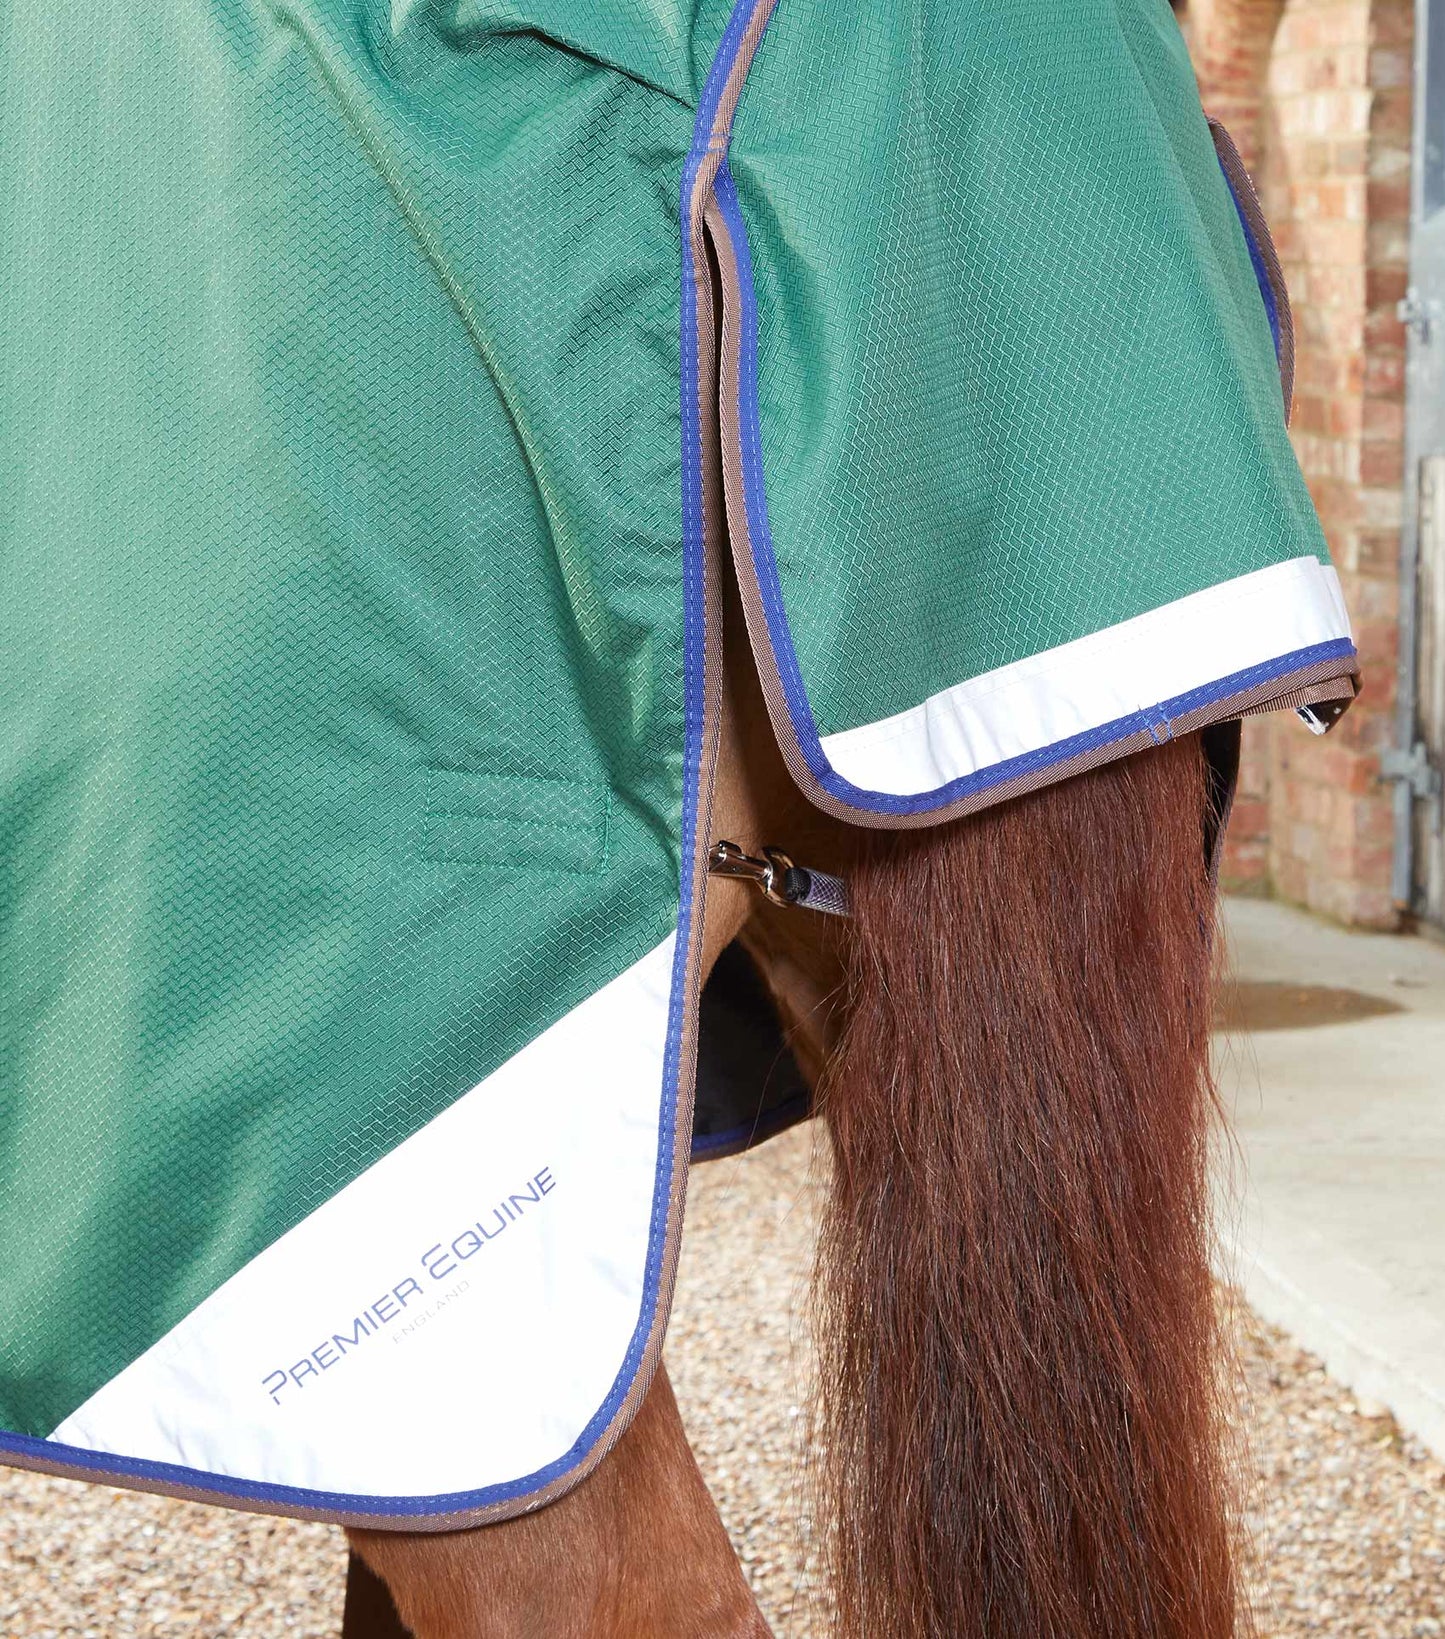 Premier Equine Akoni 0g Turnout Rug with Classic Neck Cover